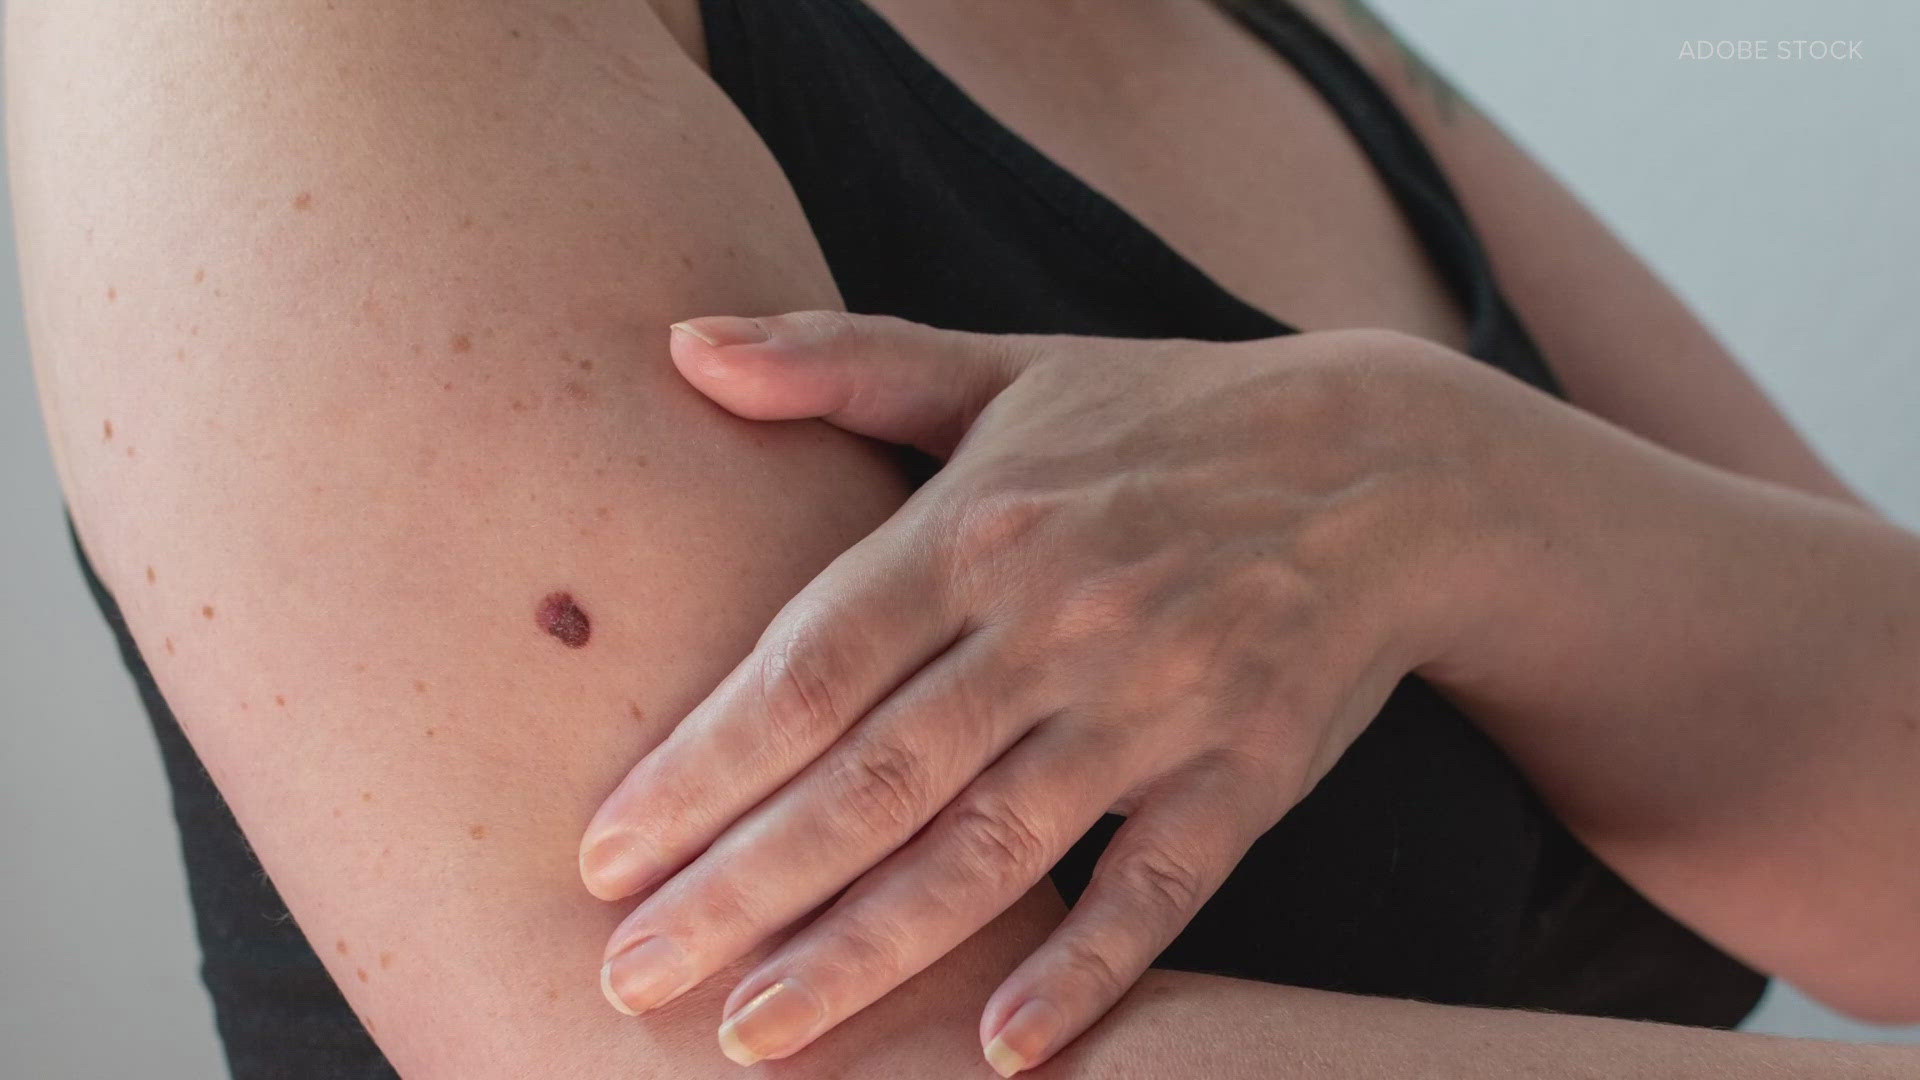 What type of mole is suspicious? Is a little bit of sun exposure OK? What about vitamin D absorption? A Fred Hutch dermatologist weighs in.